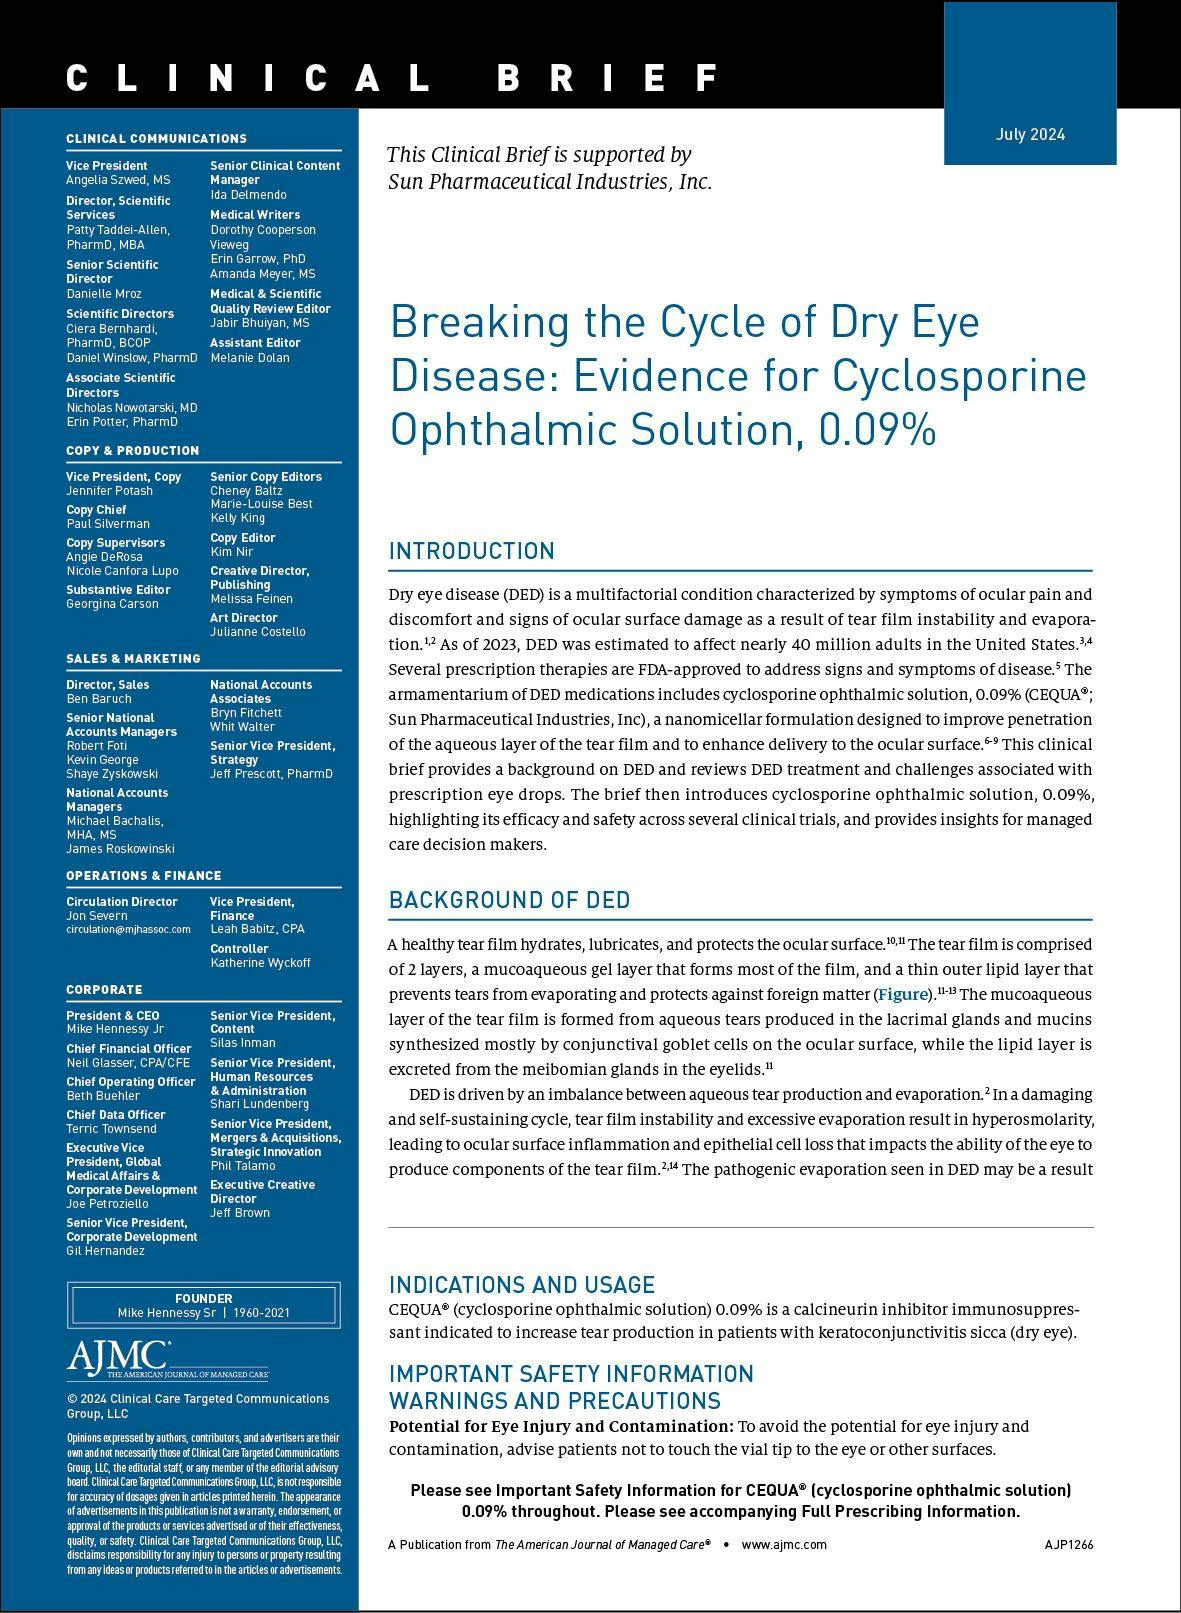 Breaking the Cycle of Dry Eye Disease: Evidence for Cyclosporine Ophthalmic Solution, 0.09%